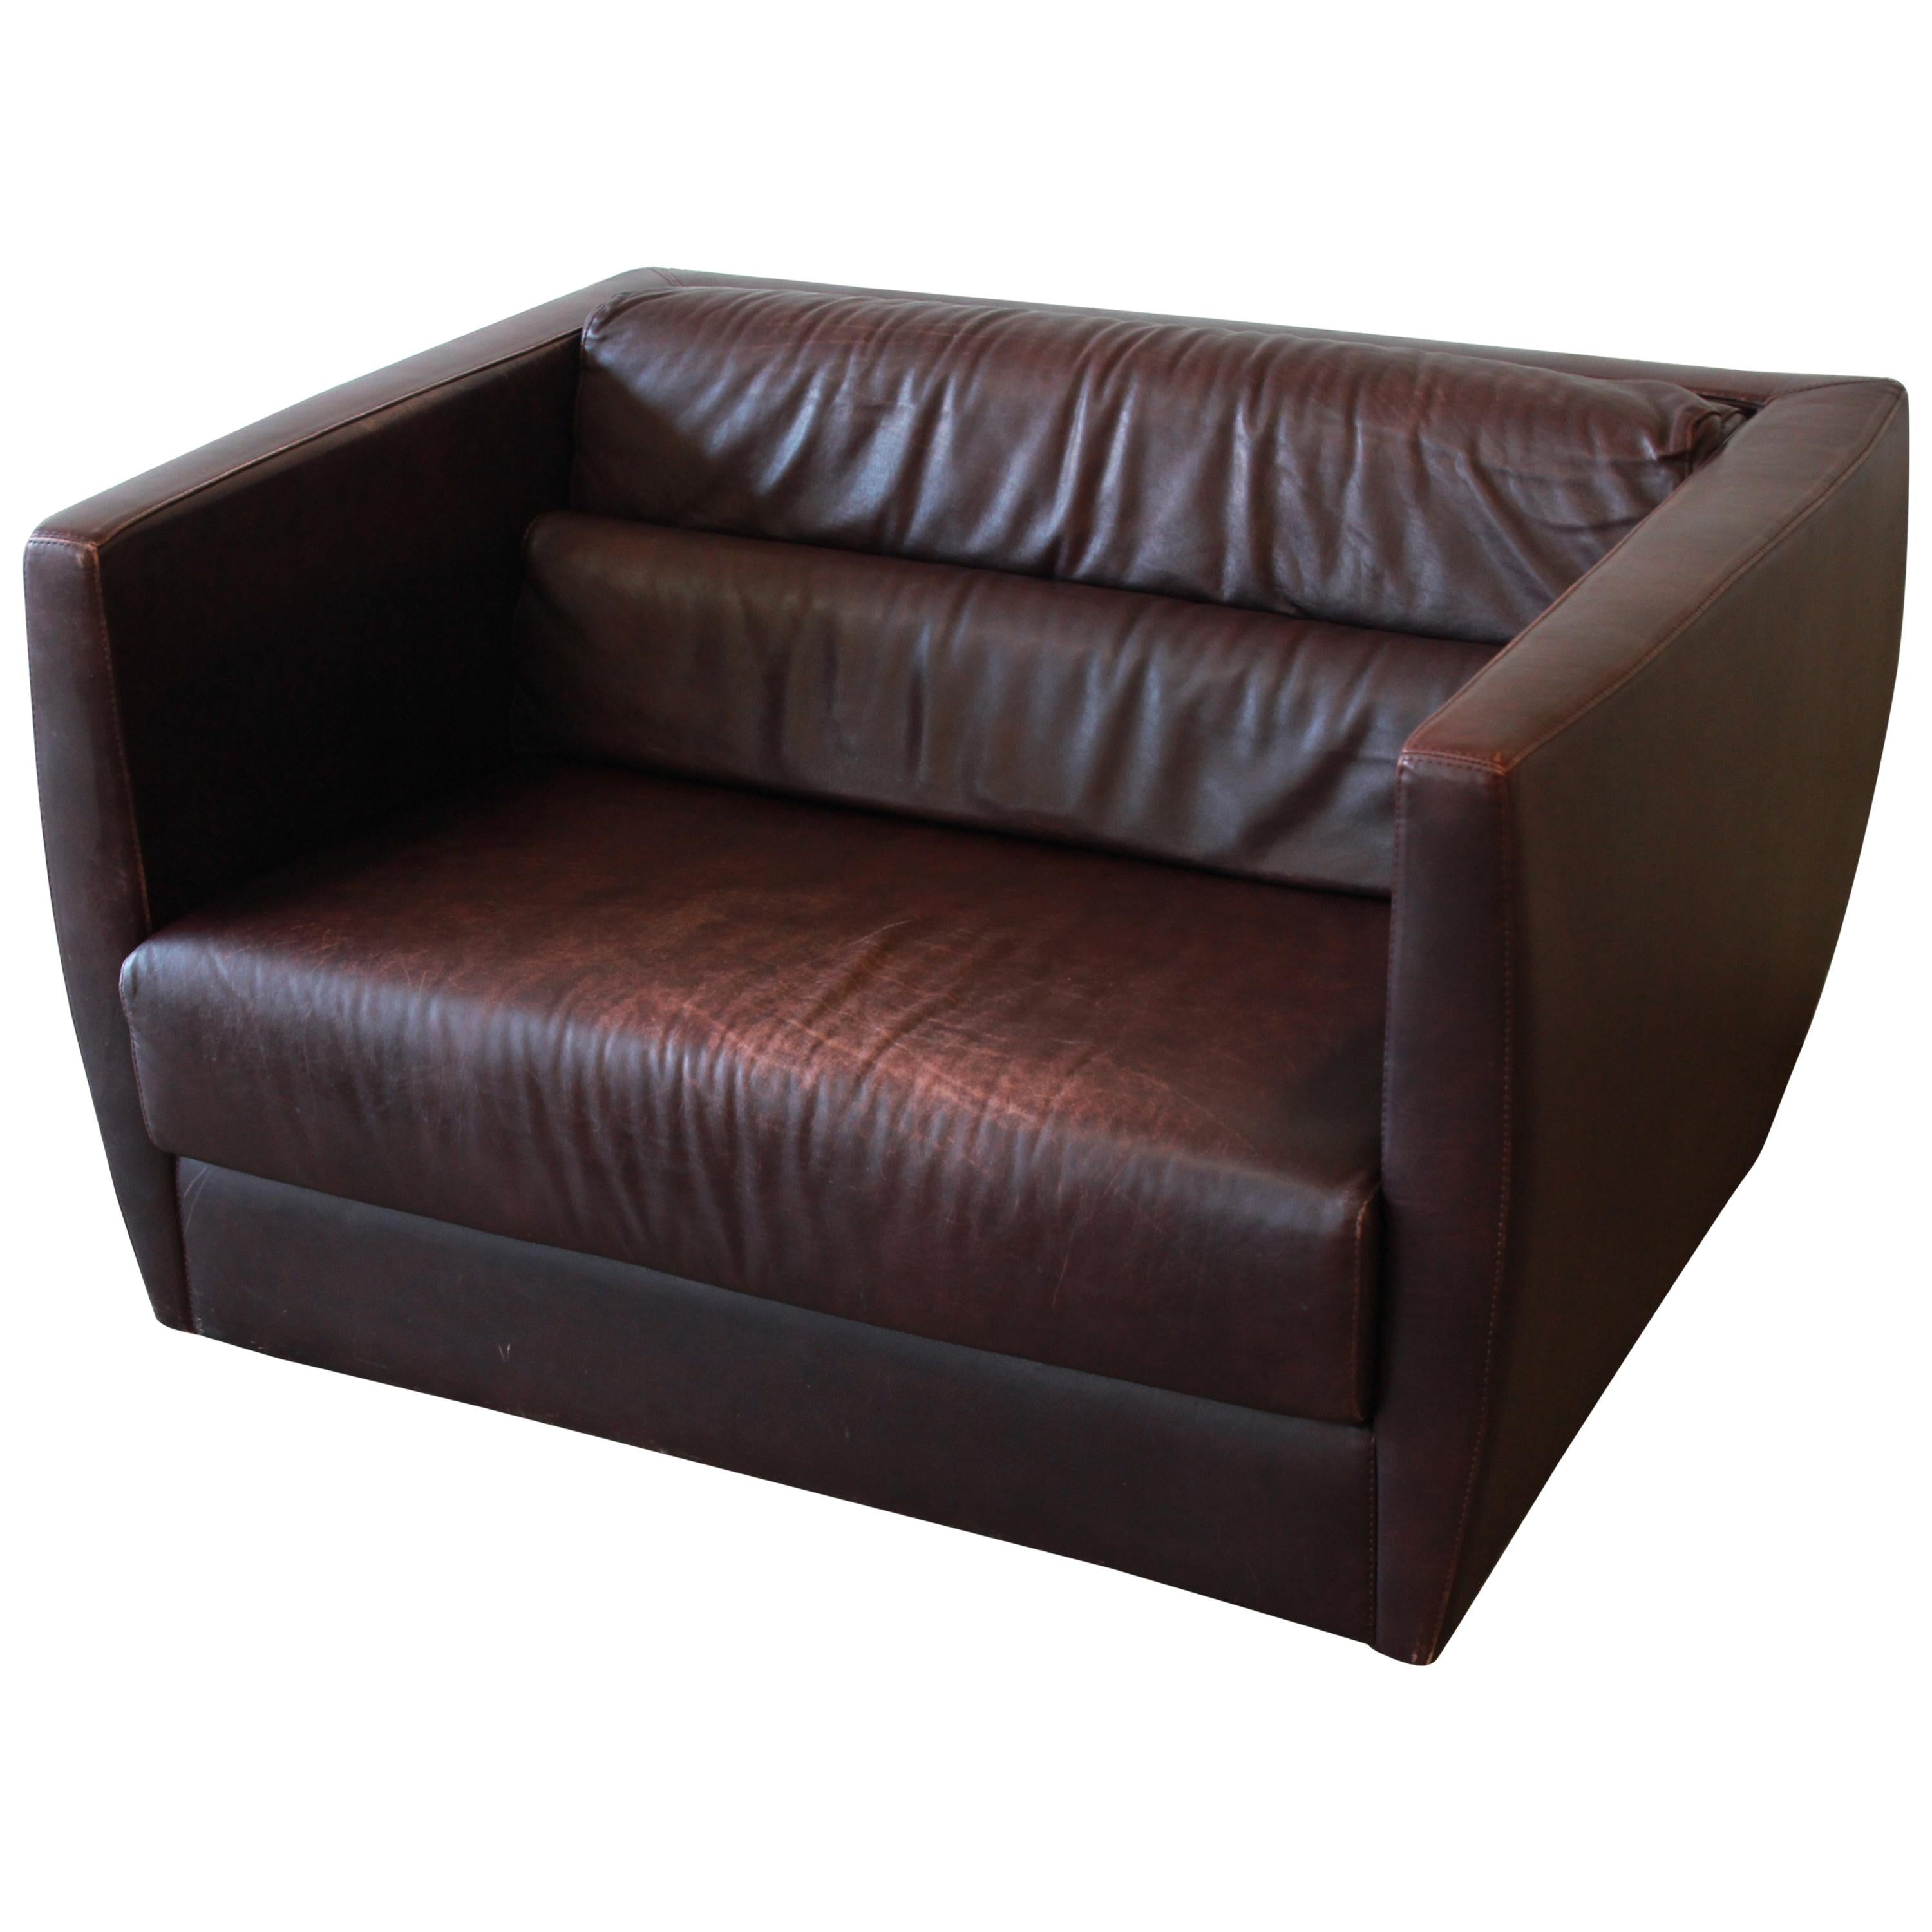 Roche Bobois Bauhaus Style Leather Loveseat or Cube Chair, 1970s